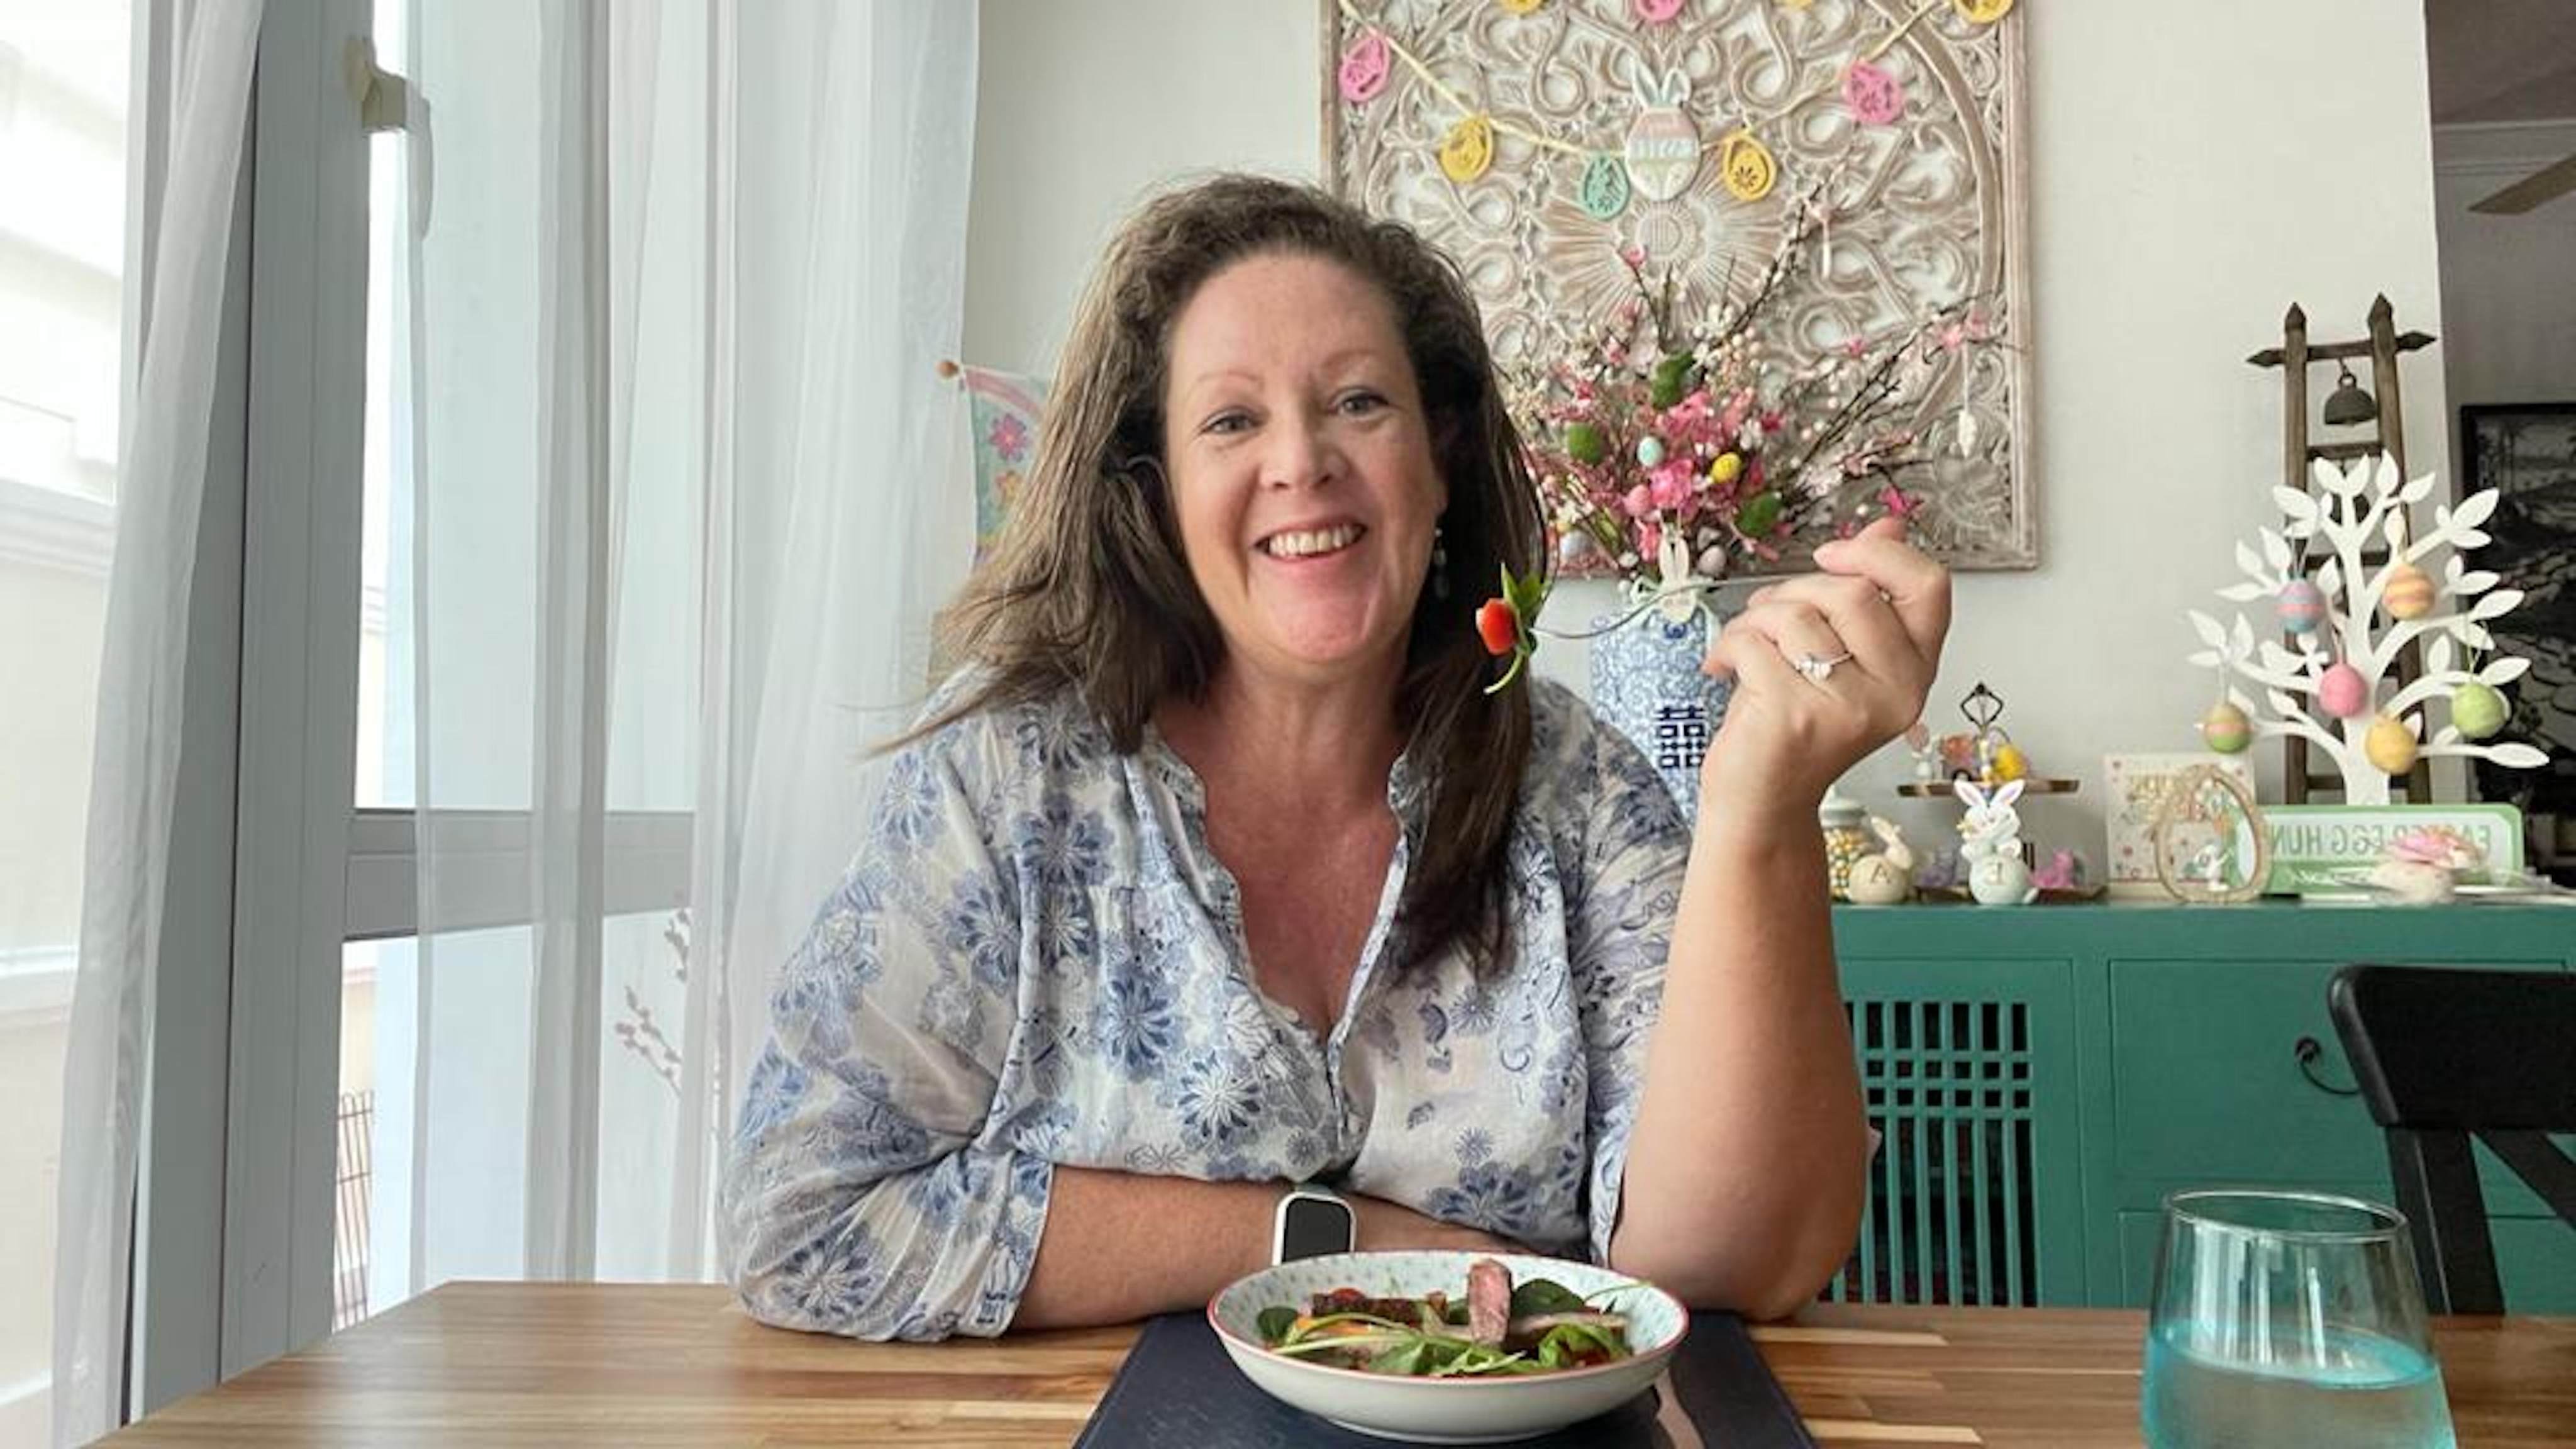 Kate Moreau struggled with the transition to menopause, also known as perimenopause, but says that talking about it to others in the same boat was one of the things that helped. Photo: Kate Moreau